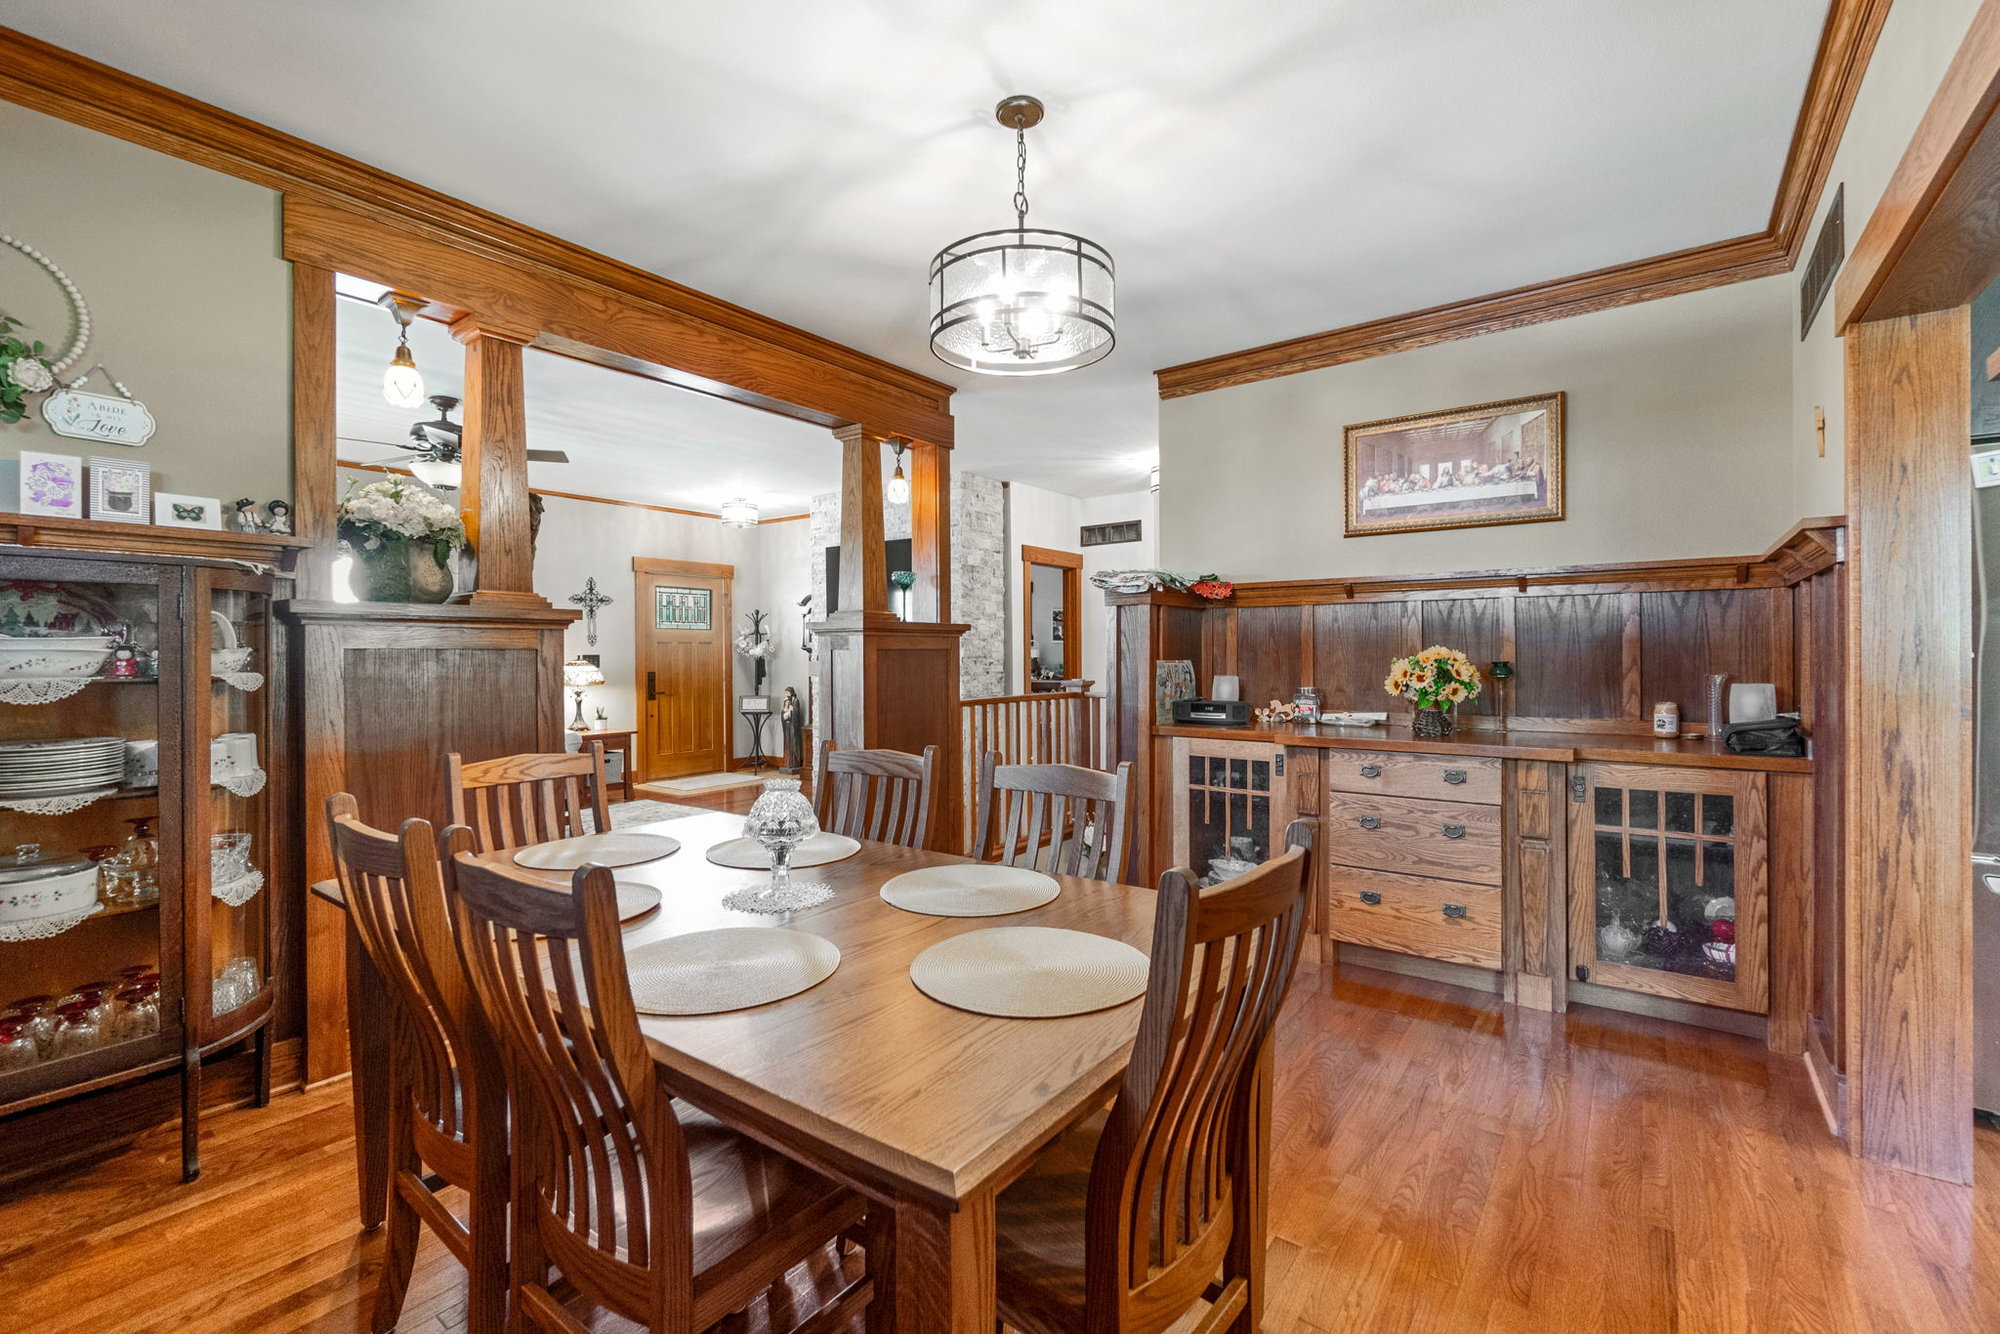 Beautiful Craftsman Style Can be Found in this Klunder Home in Reinbeck Iowa - 105 Valley Dr., Reinbeck